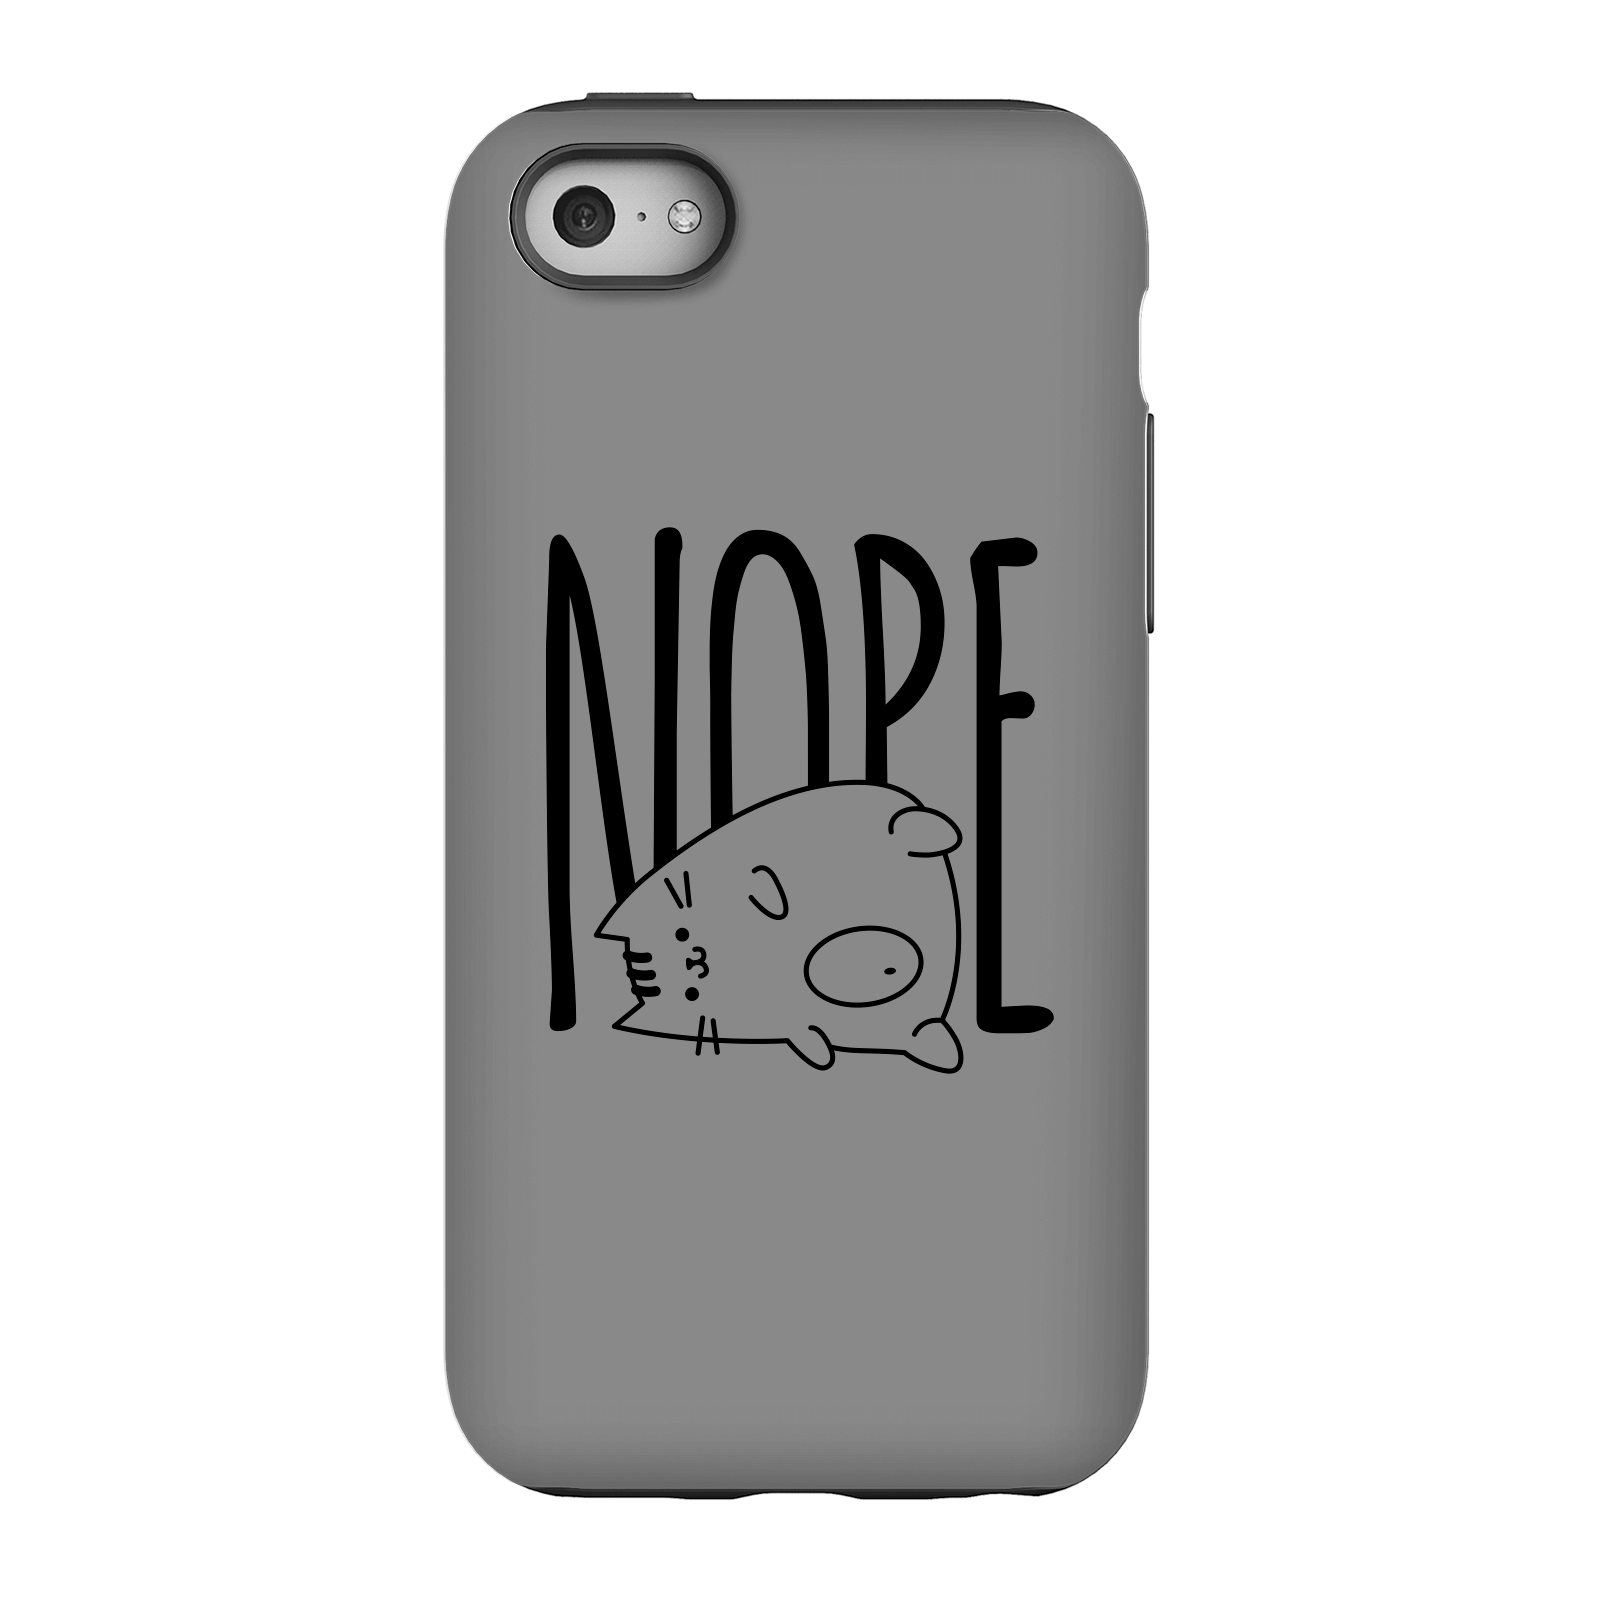 Nope Phone Case for iPhone and Android - iPhone 5C - Tough Case - Matte